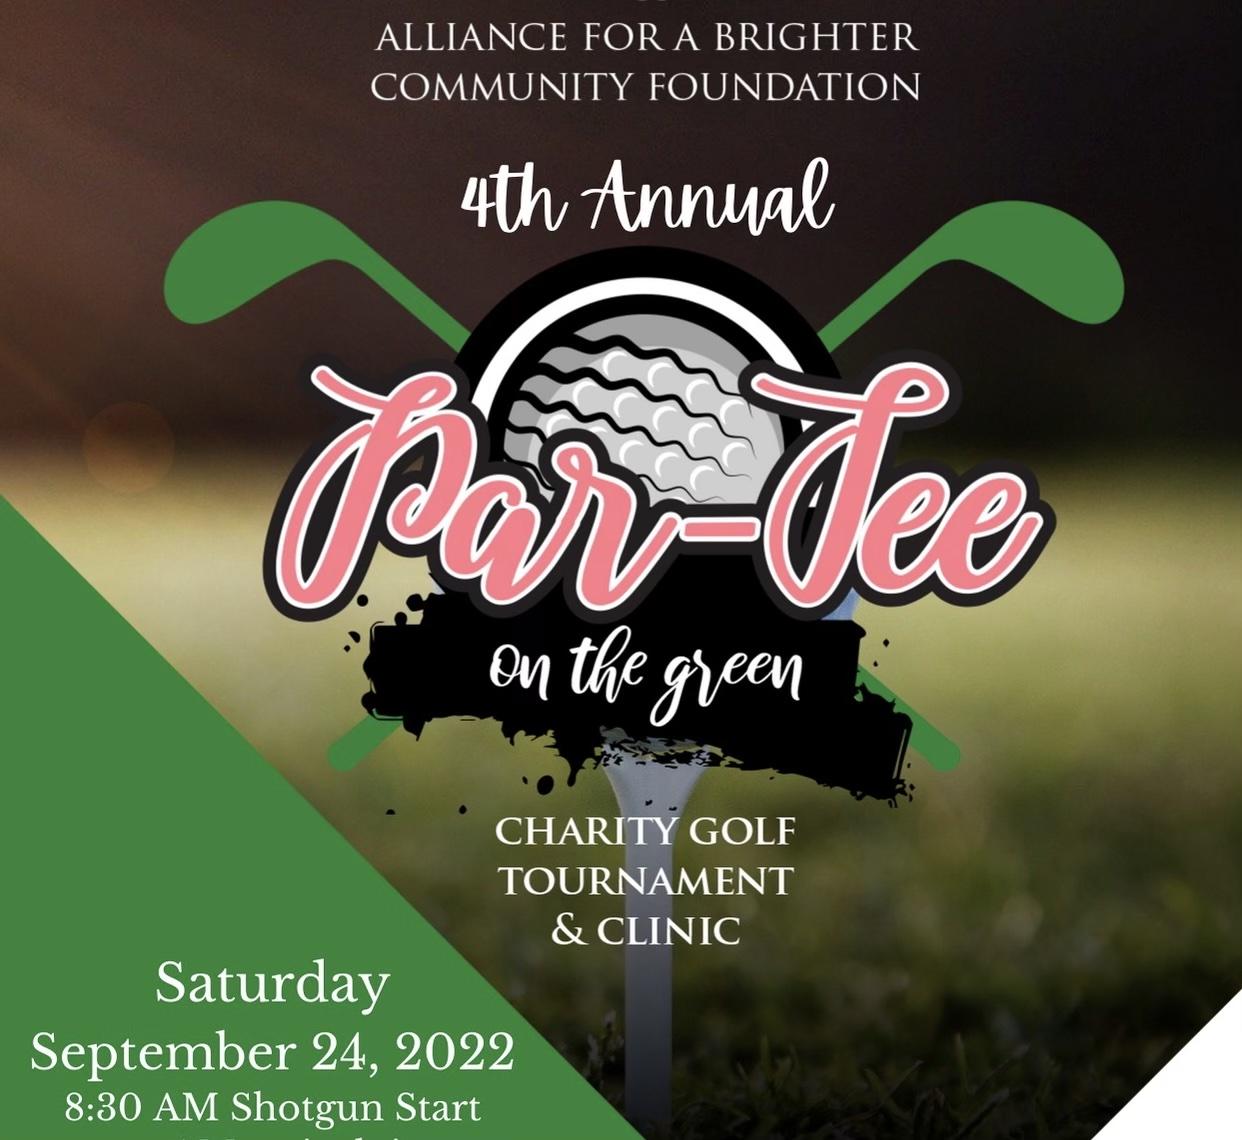 PAR-Tee on the Green Annual Charity Golf Tournament & Clinic